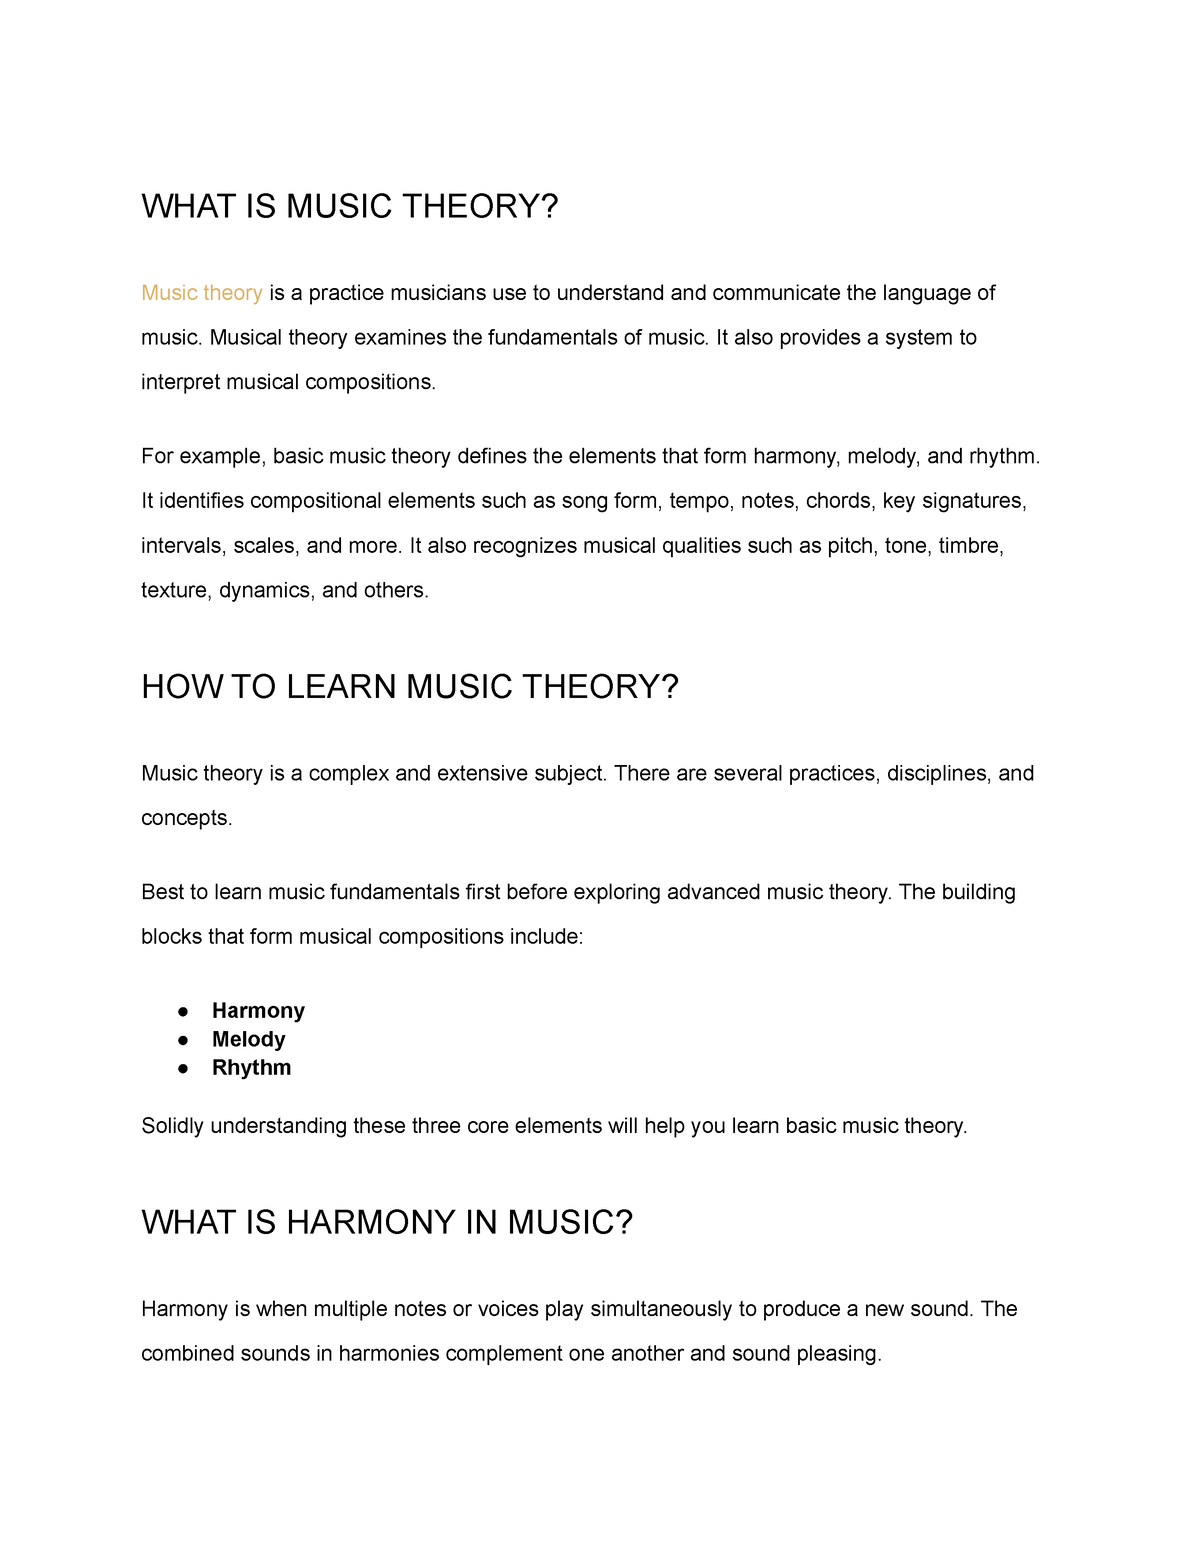 Theory - WHAT IS MUSIC THEORY? Music theory is a practice musicians use ...